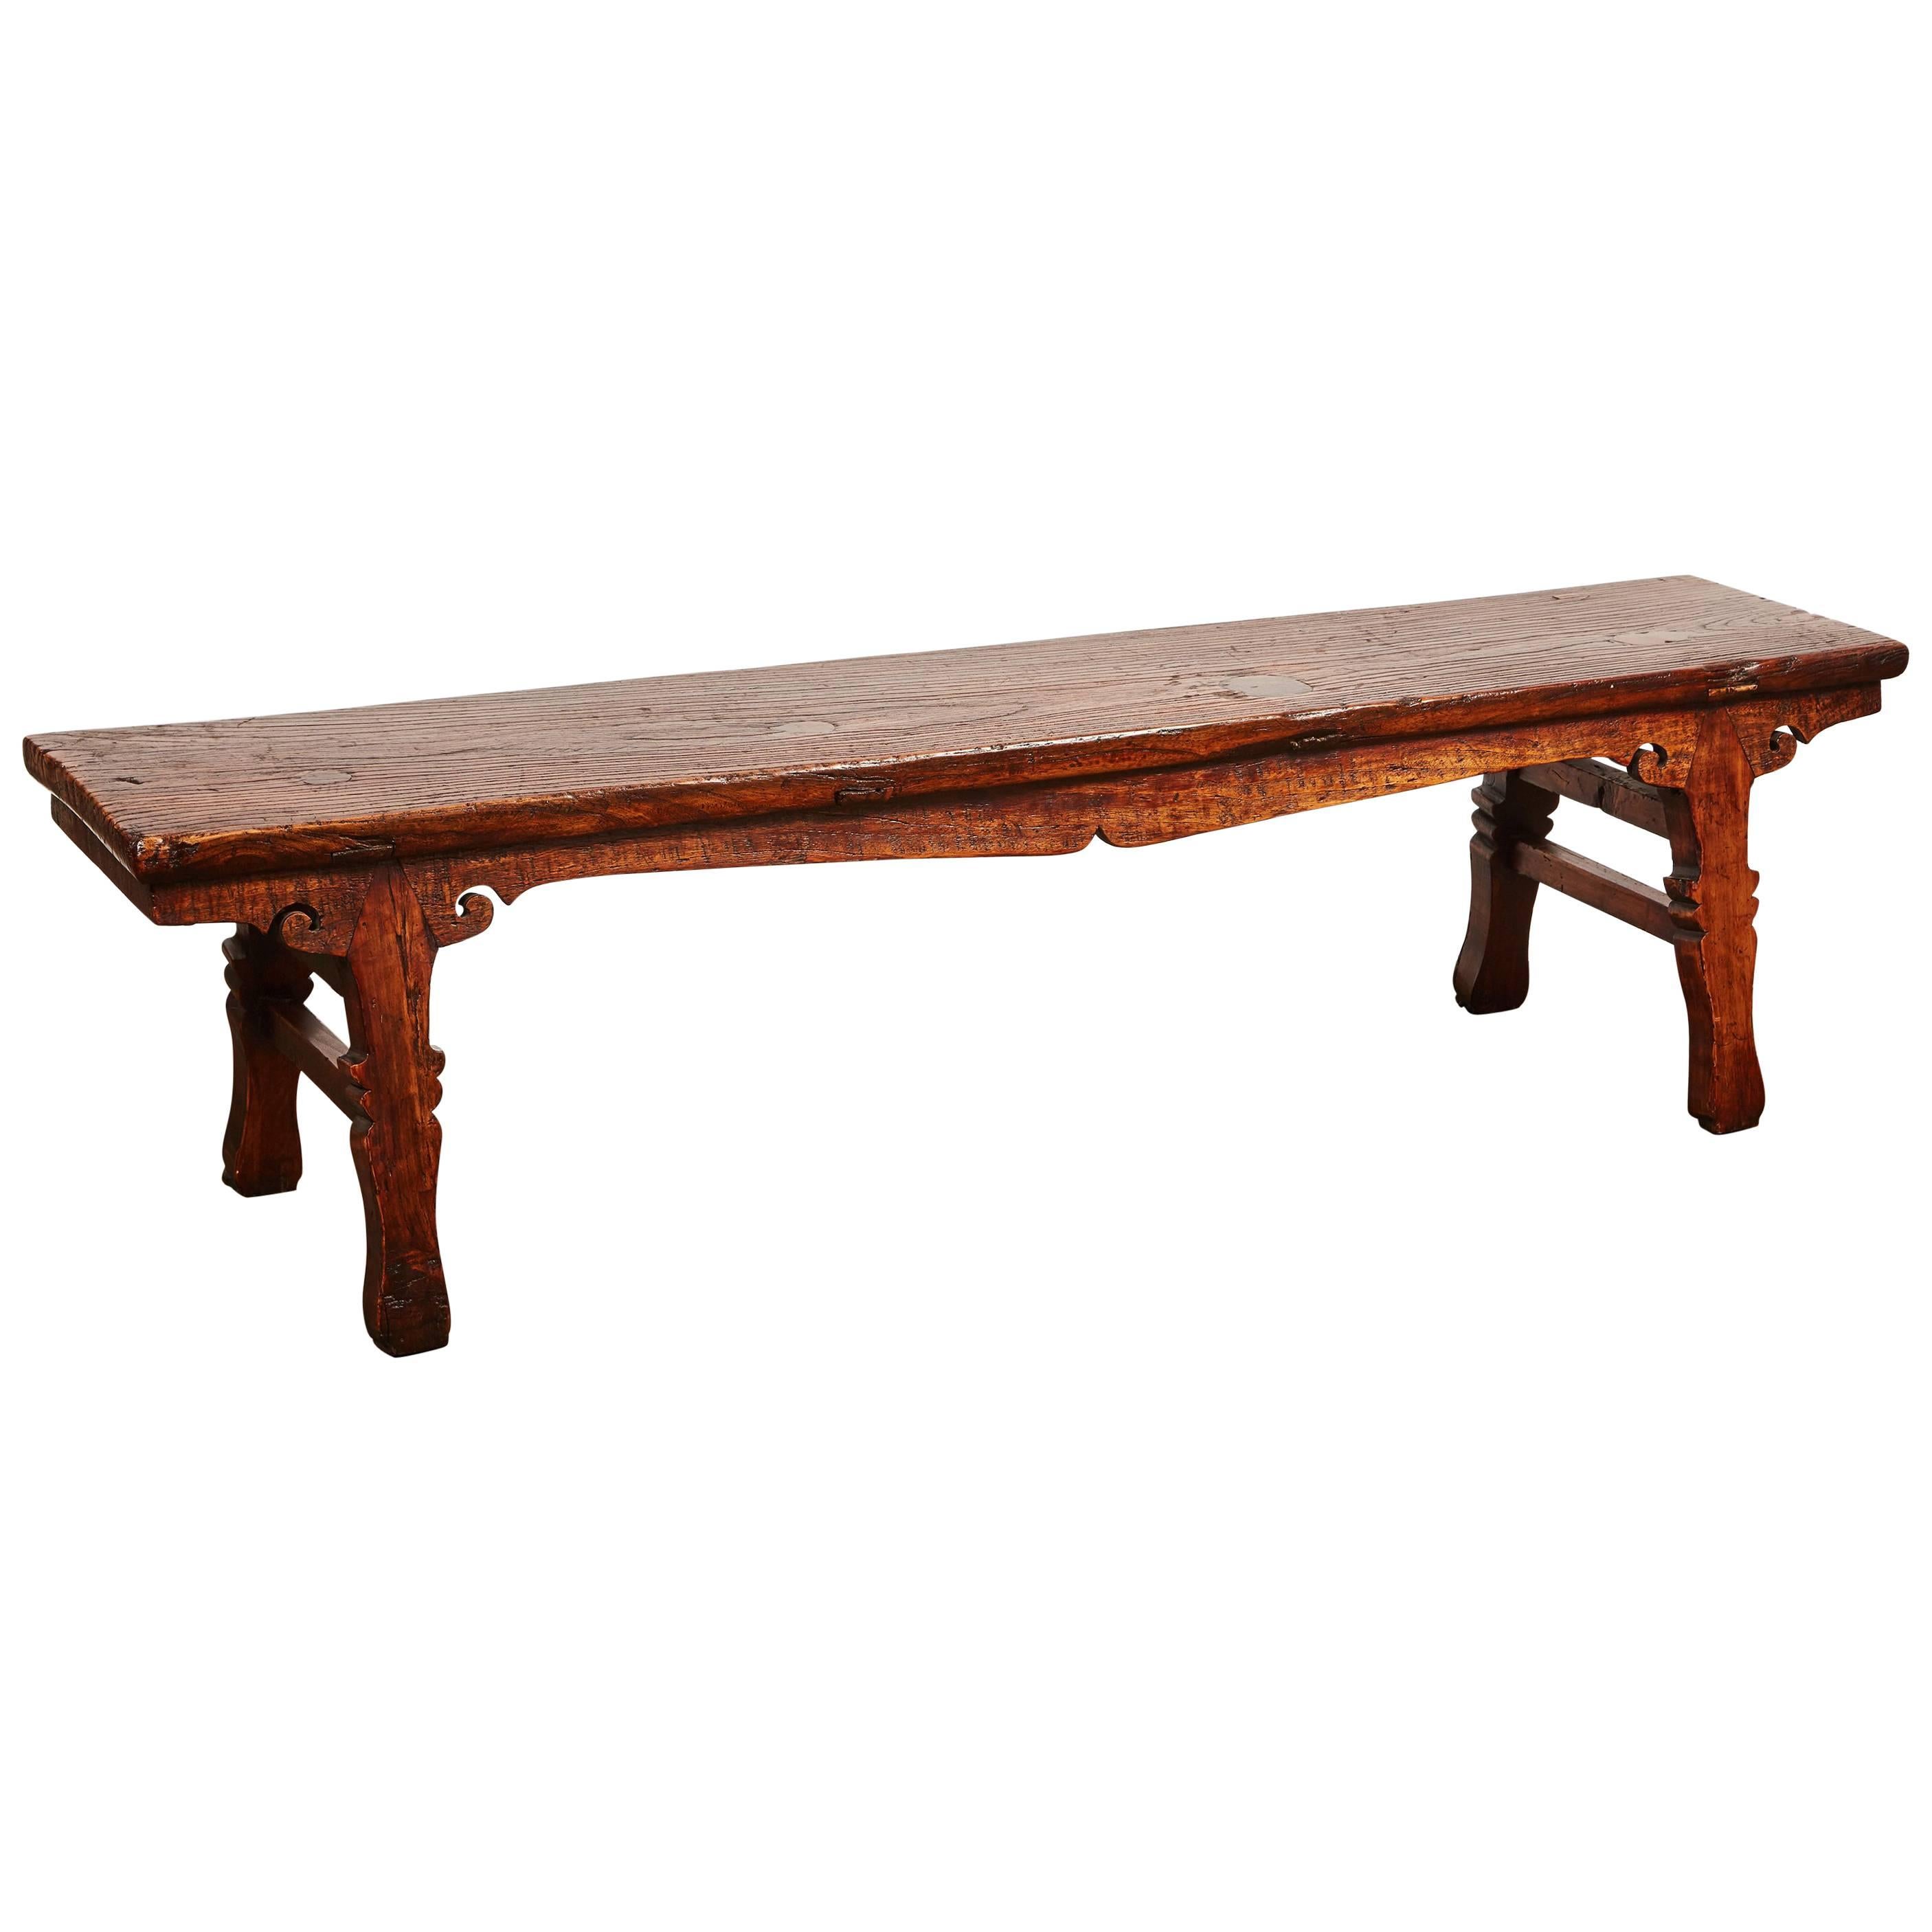 18th Century Chinese Low Sword Leg Bench or Table